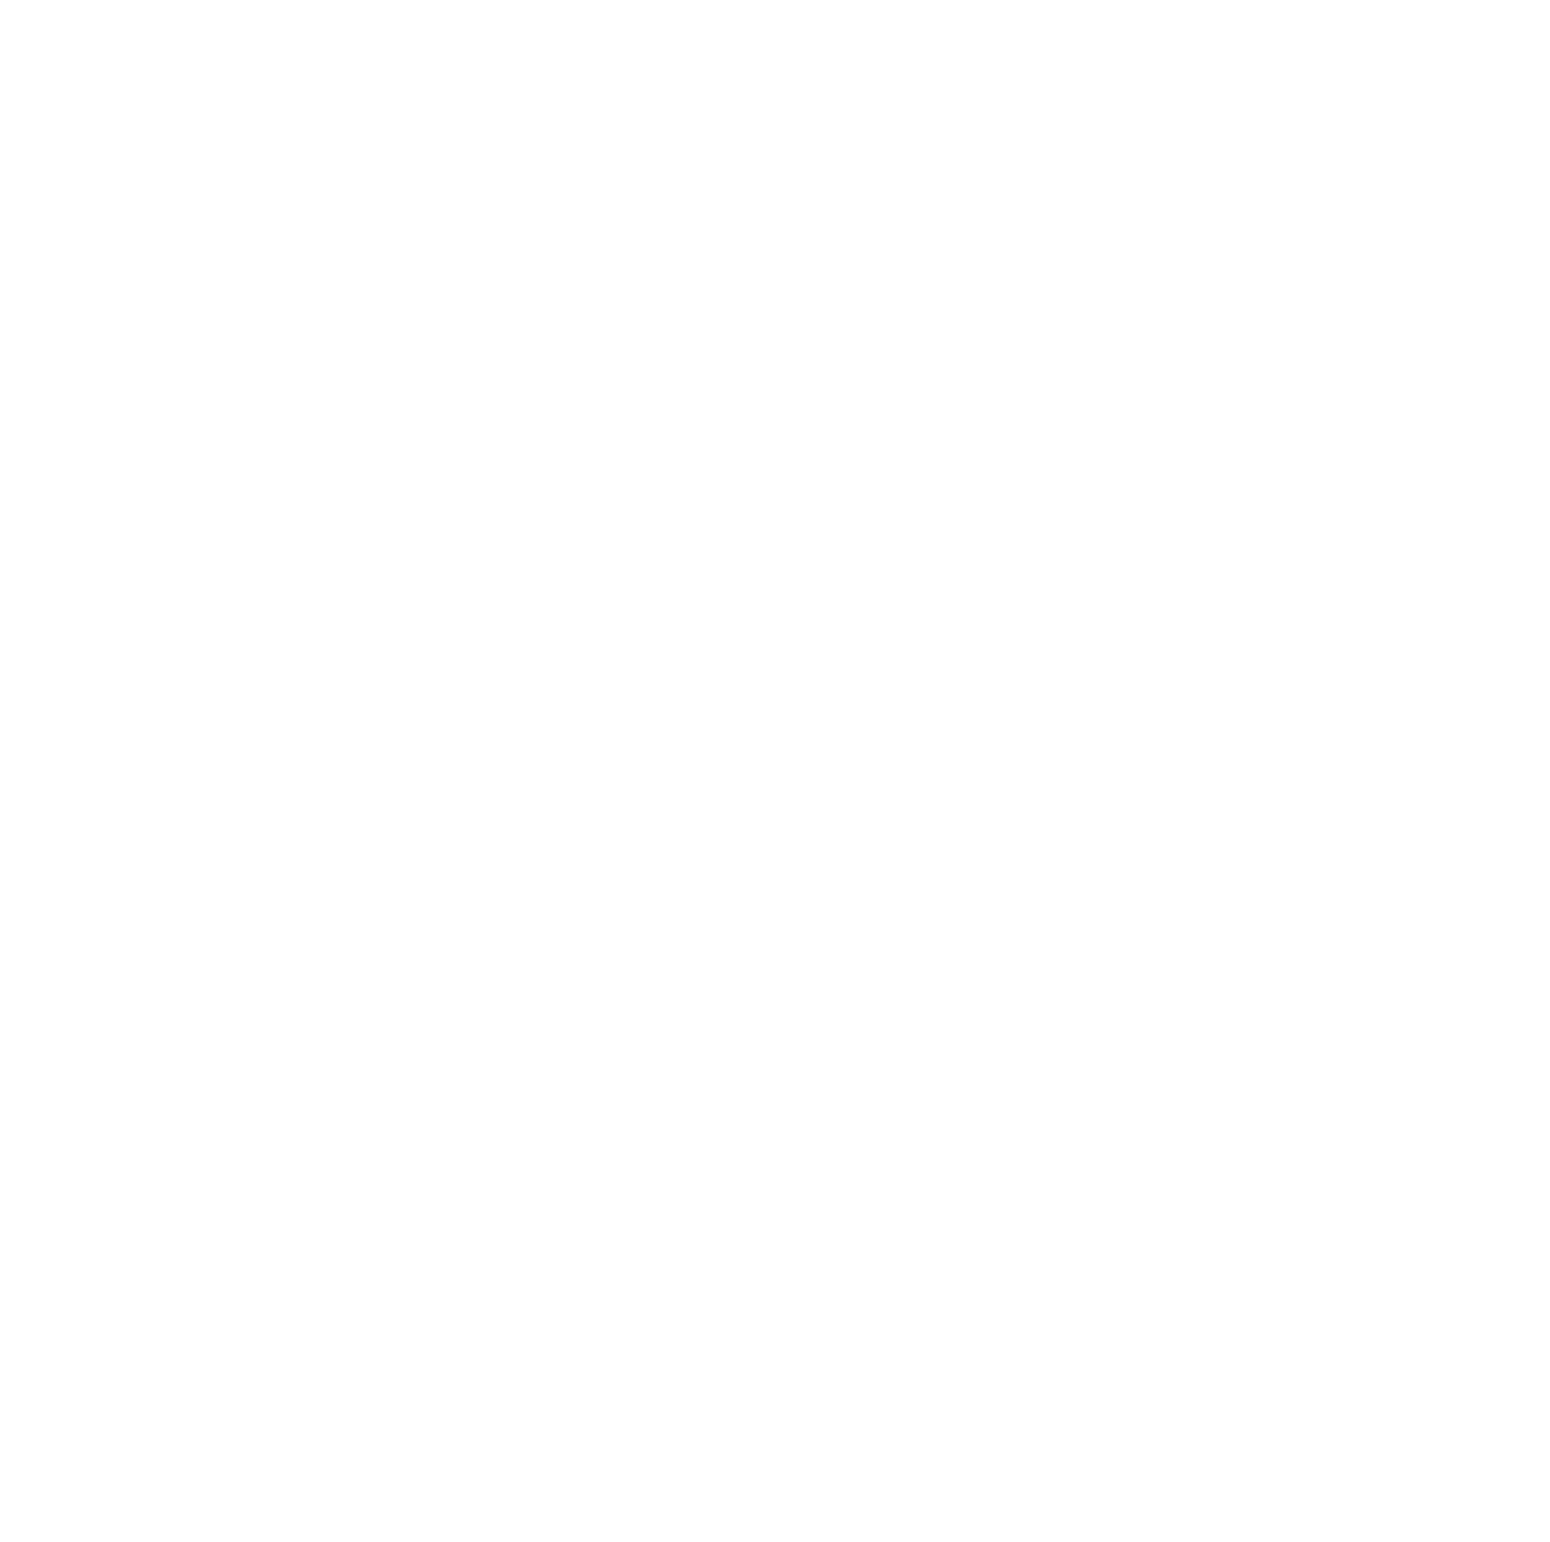 Analogue Holdings (ATAL) logo for dark backgrounds (transparent PNG)